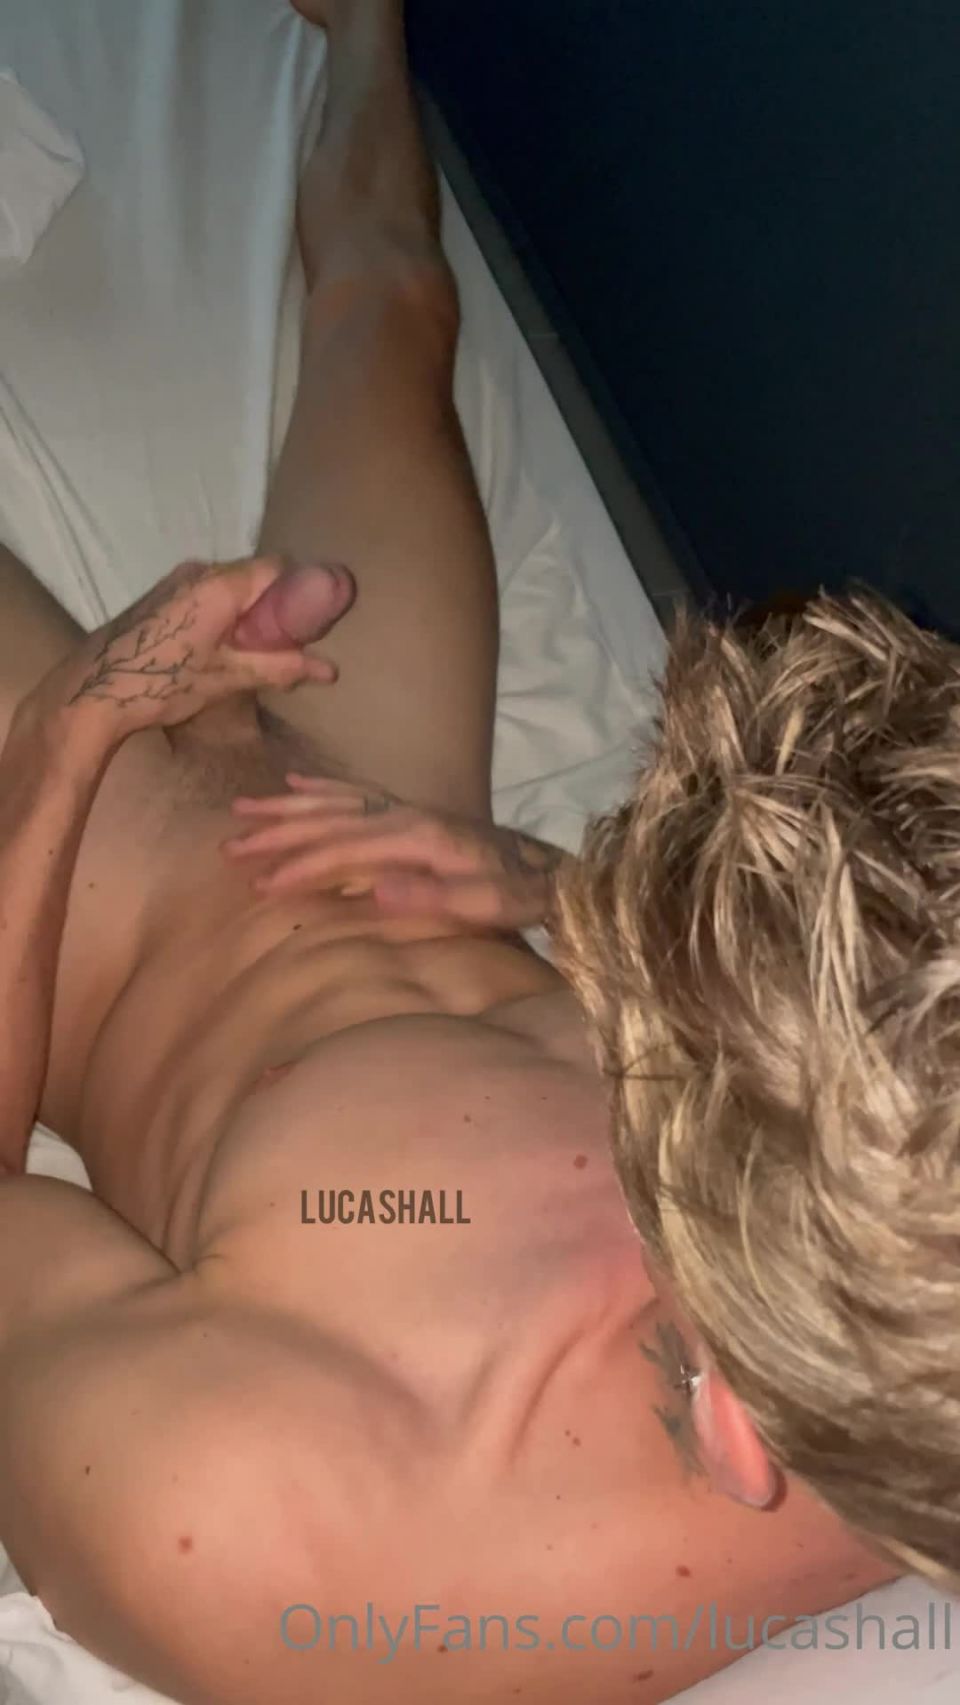 Lucas Hall () Lucashall - i wish you could suck me off rather full cum vid i was horny af 10-07-2021